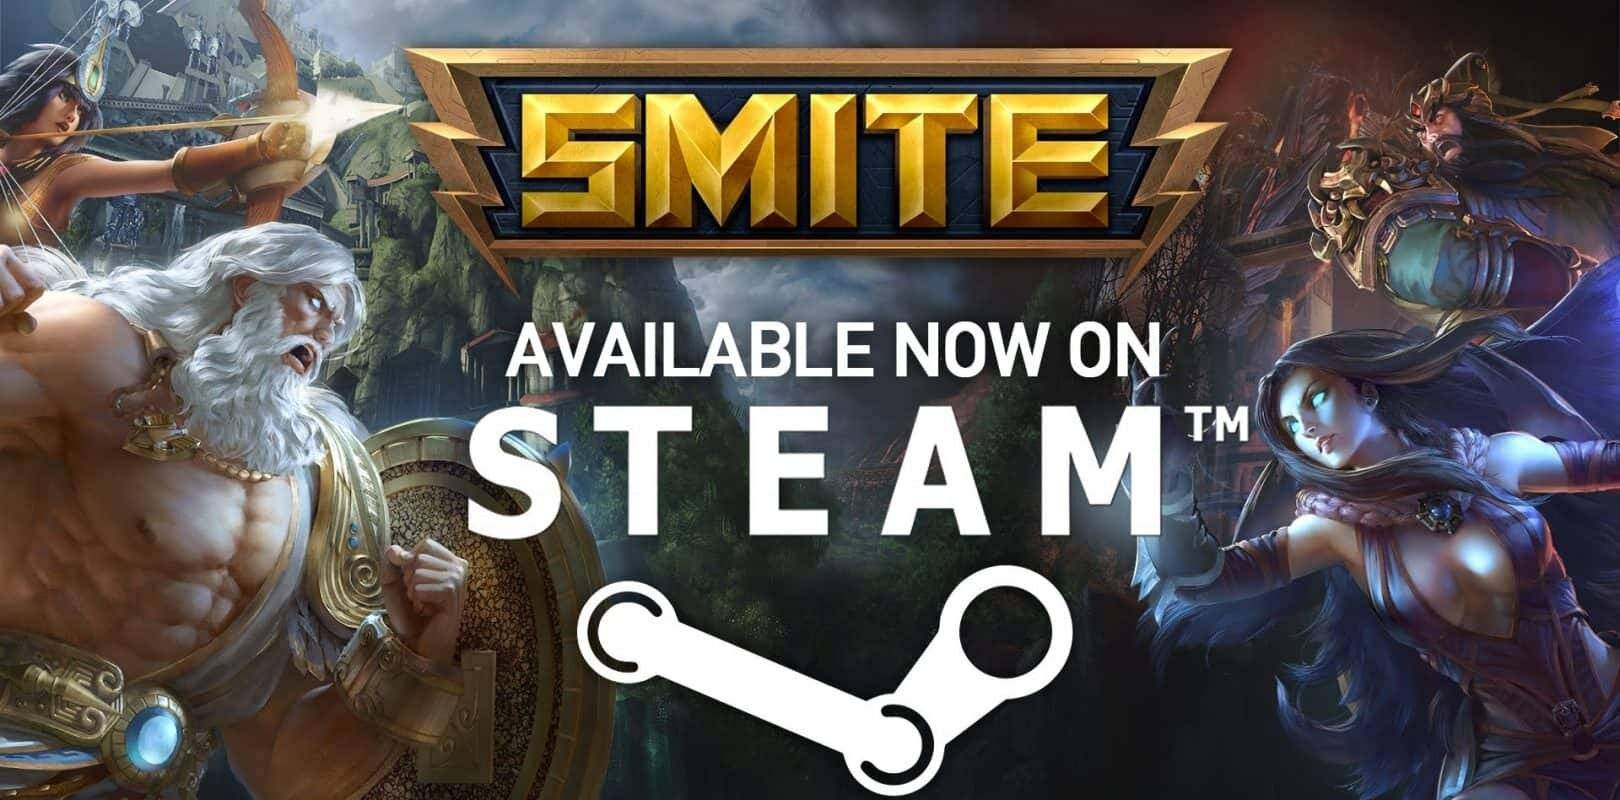 How to Logout of Smite on Steam? 4 Simple Steps HHOWTO